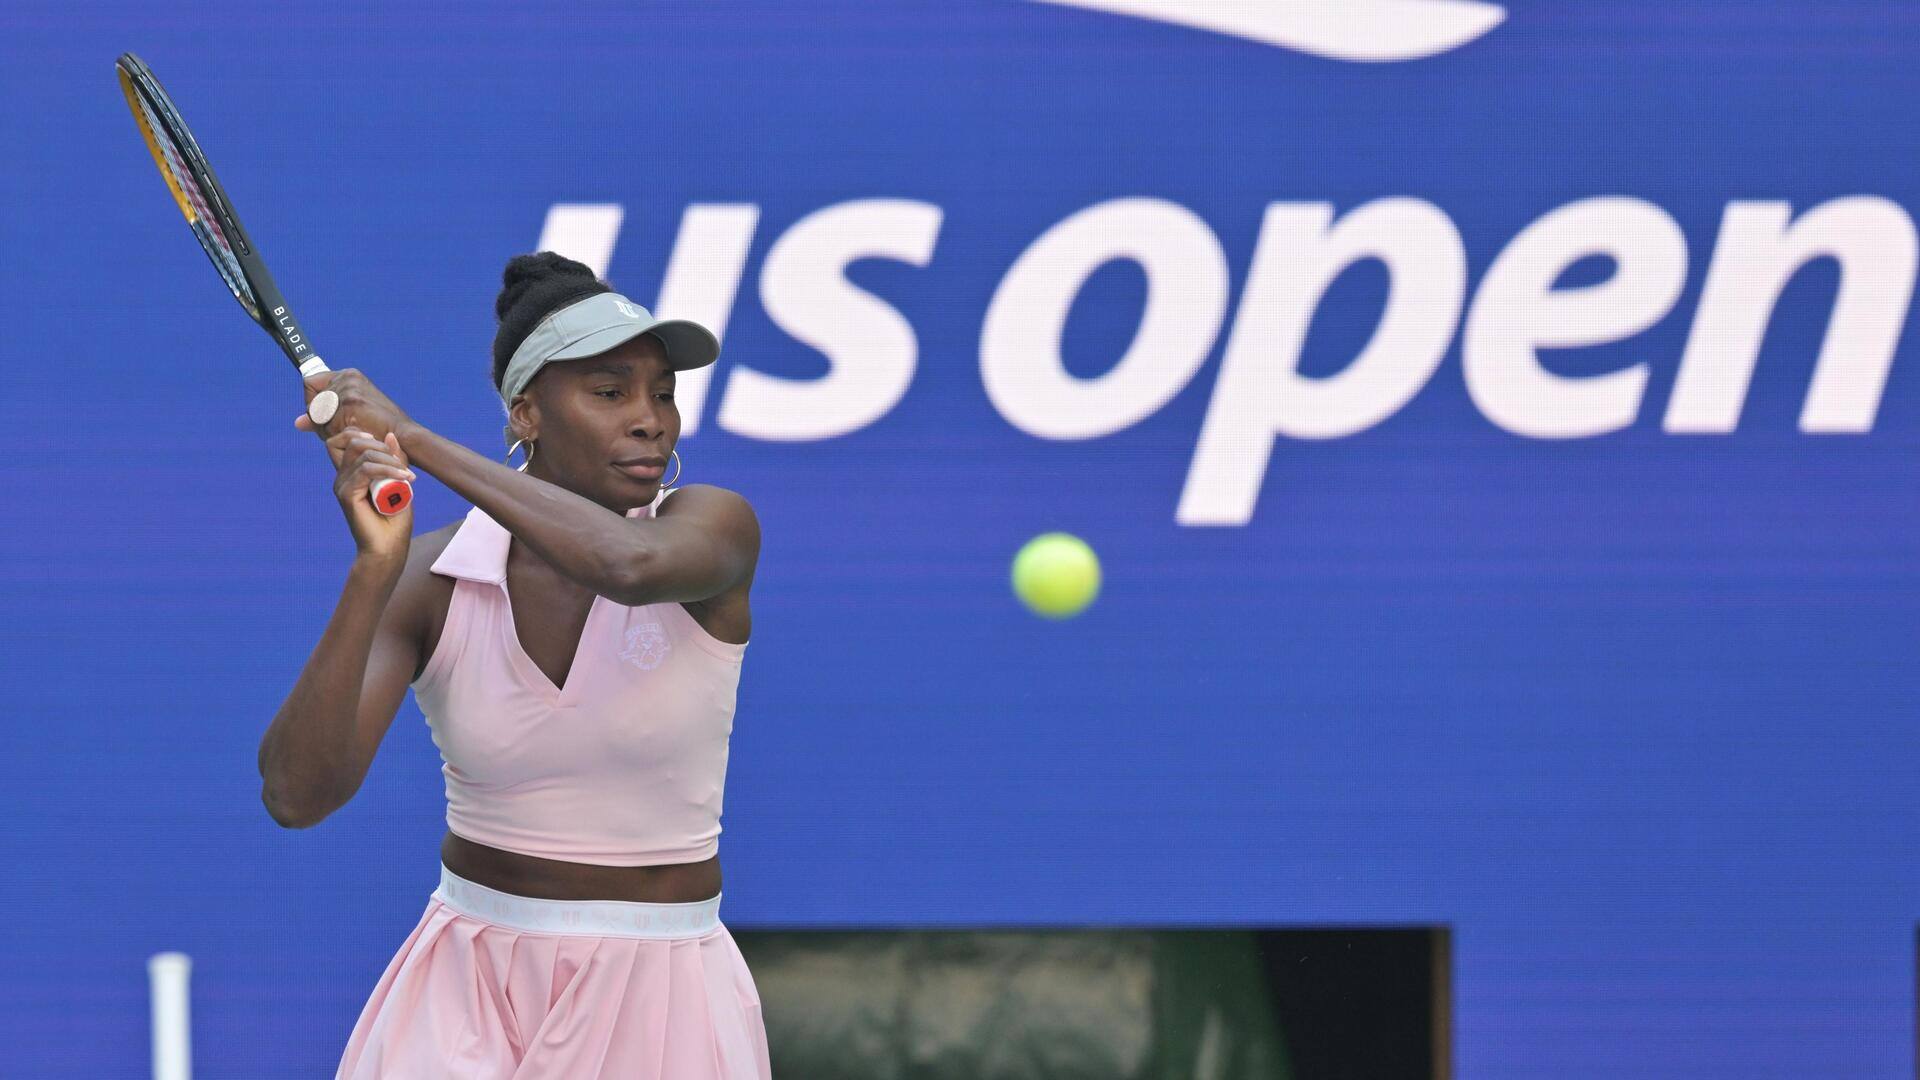 Venus Williams to compete in a record-extending 24th US Open